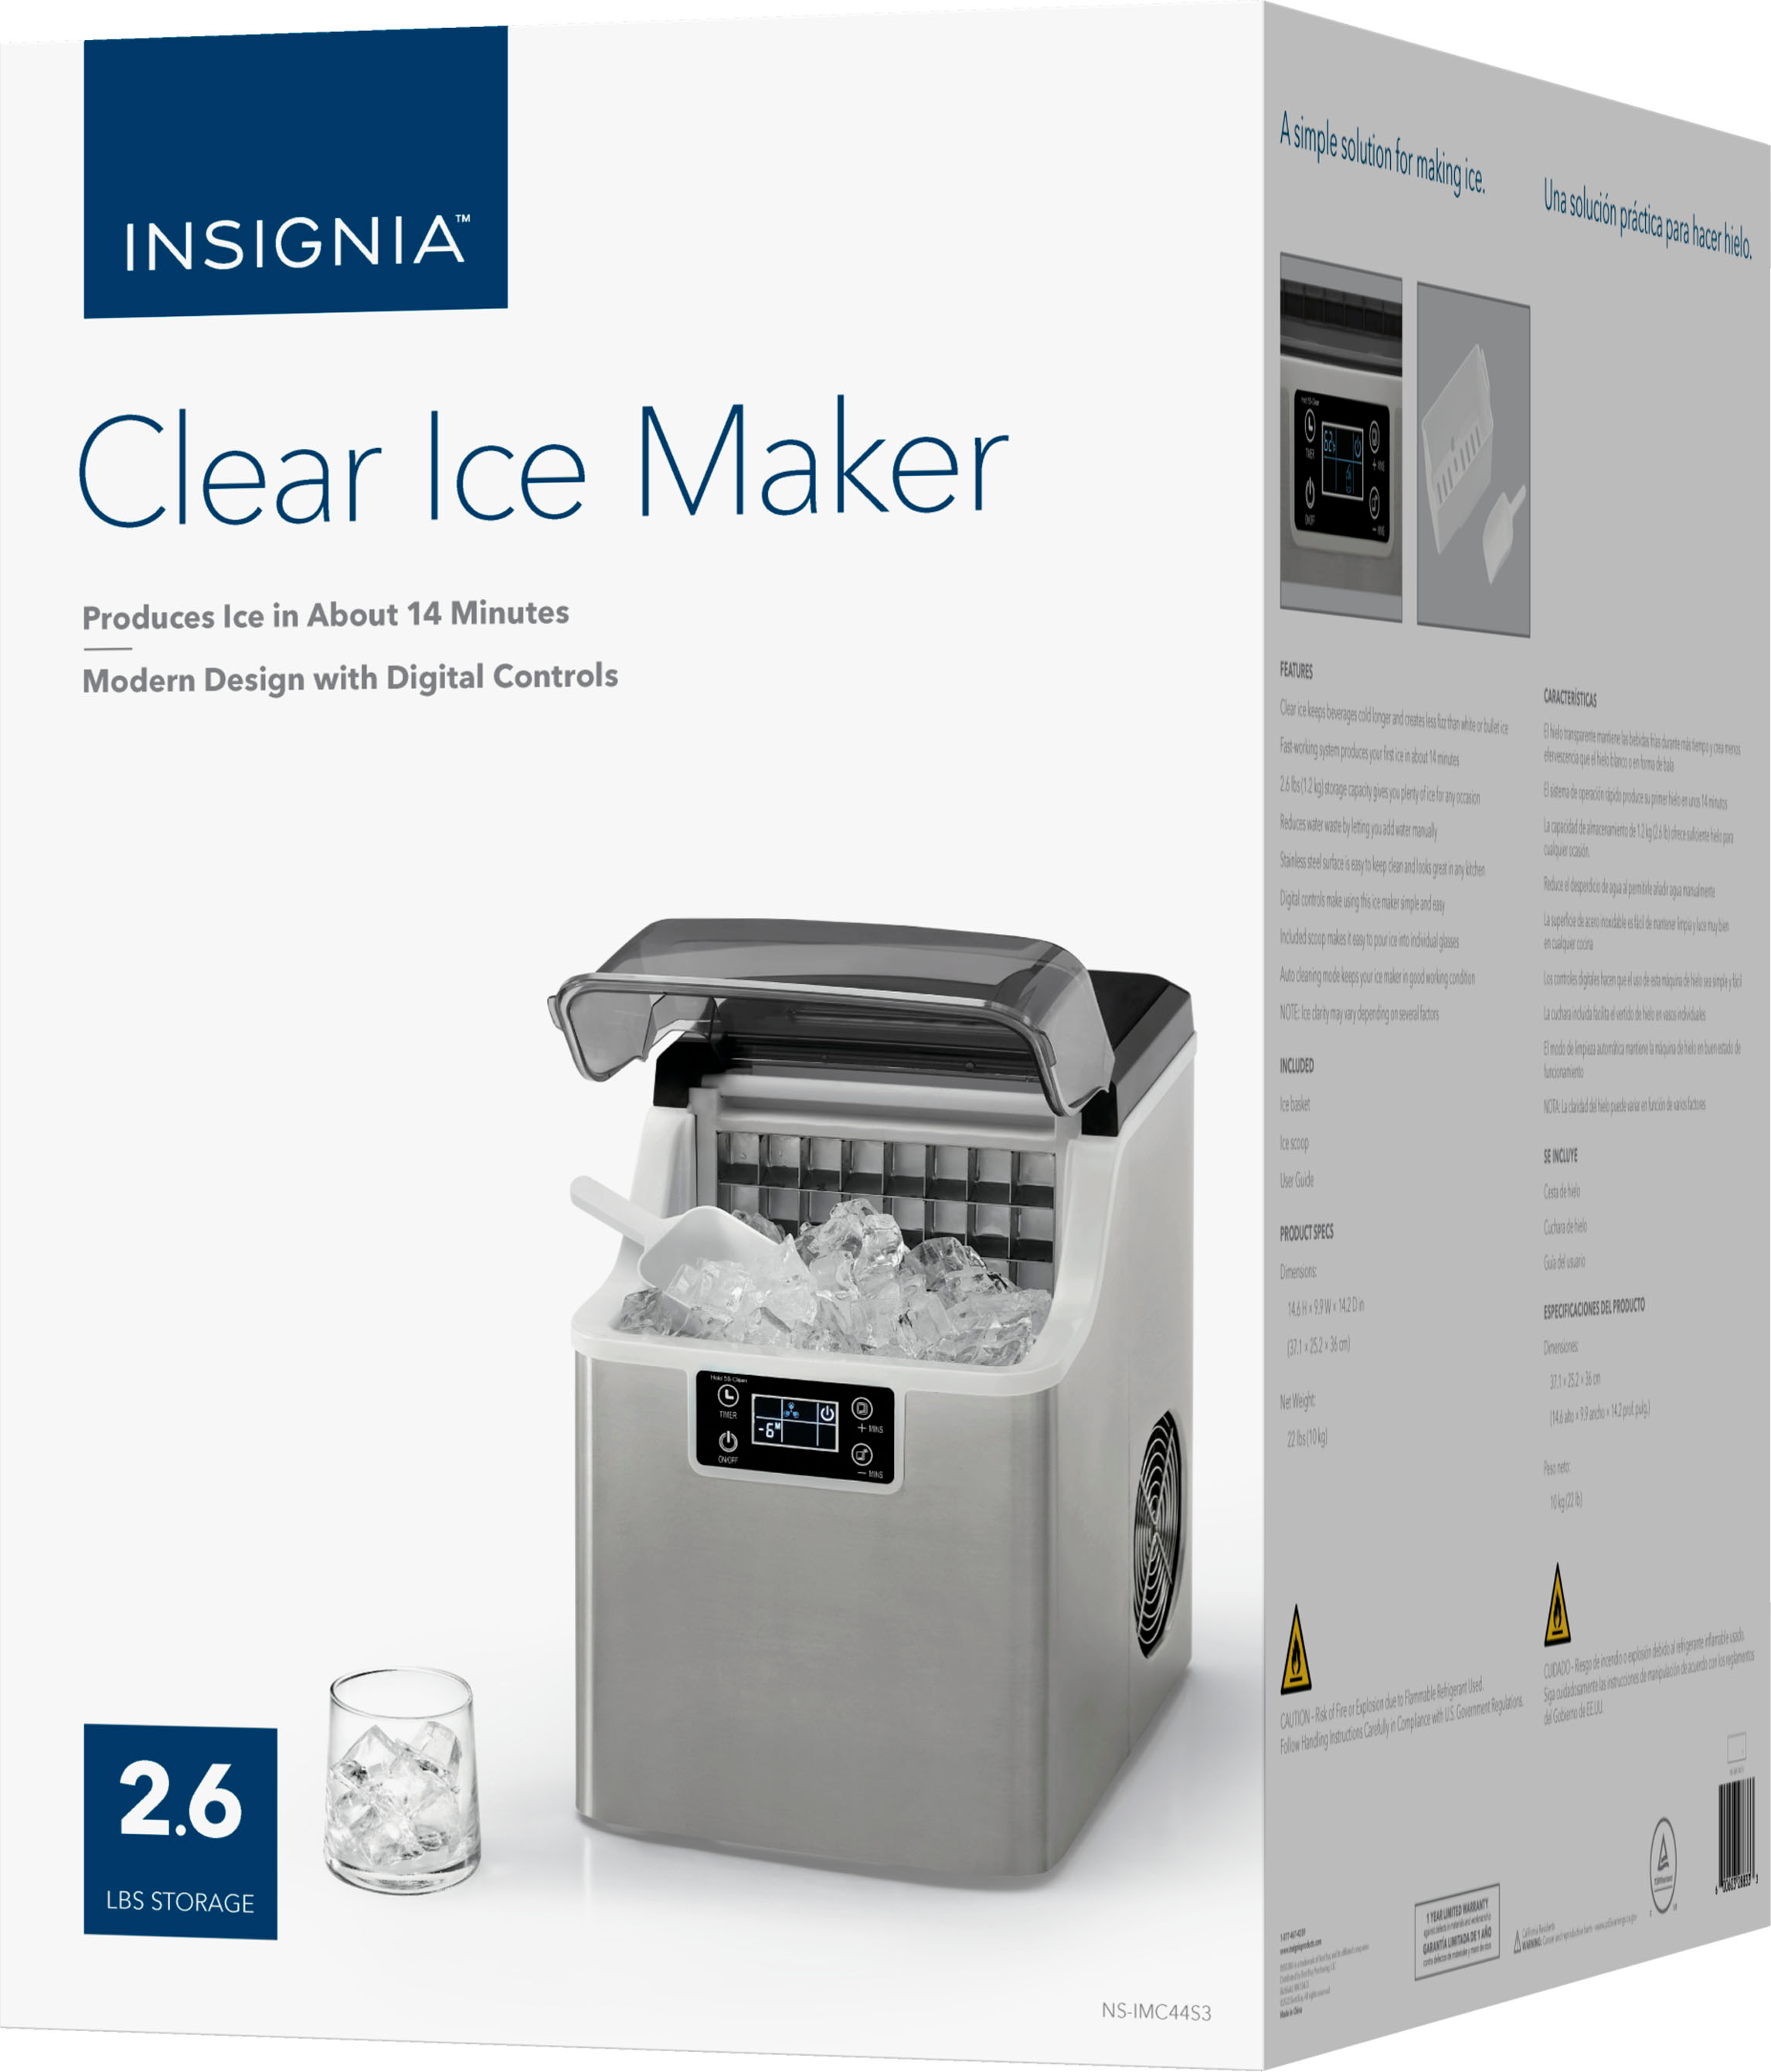 The Clear Ice Maker